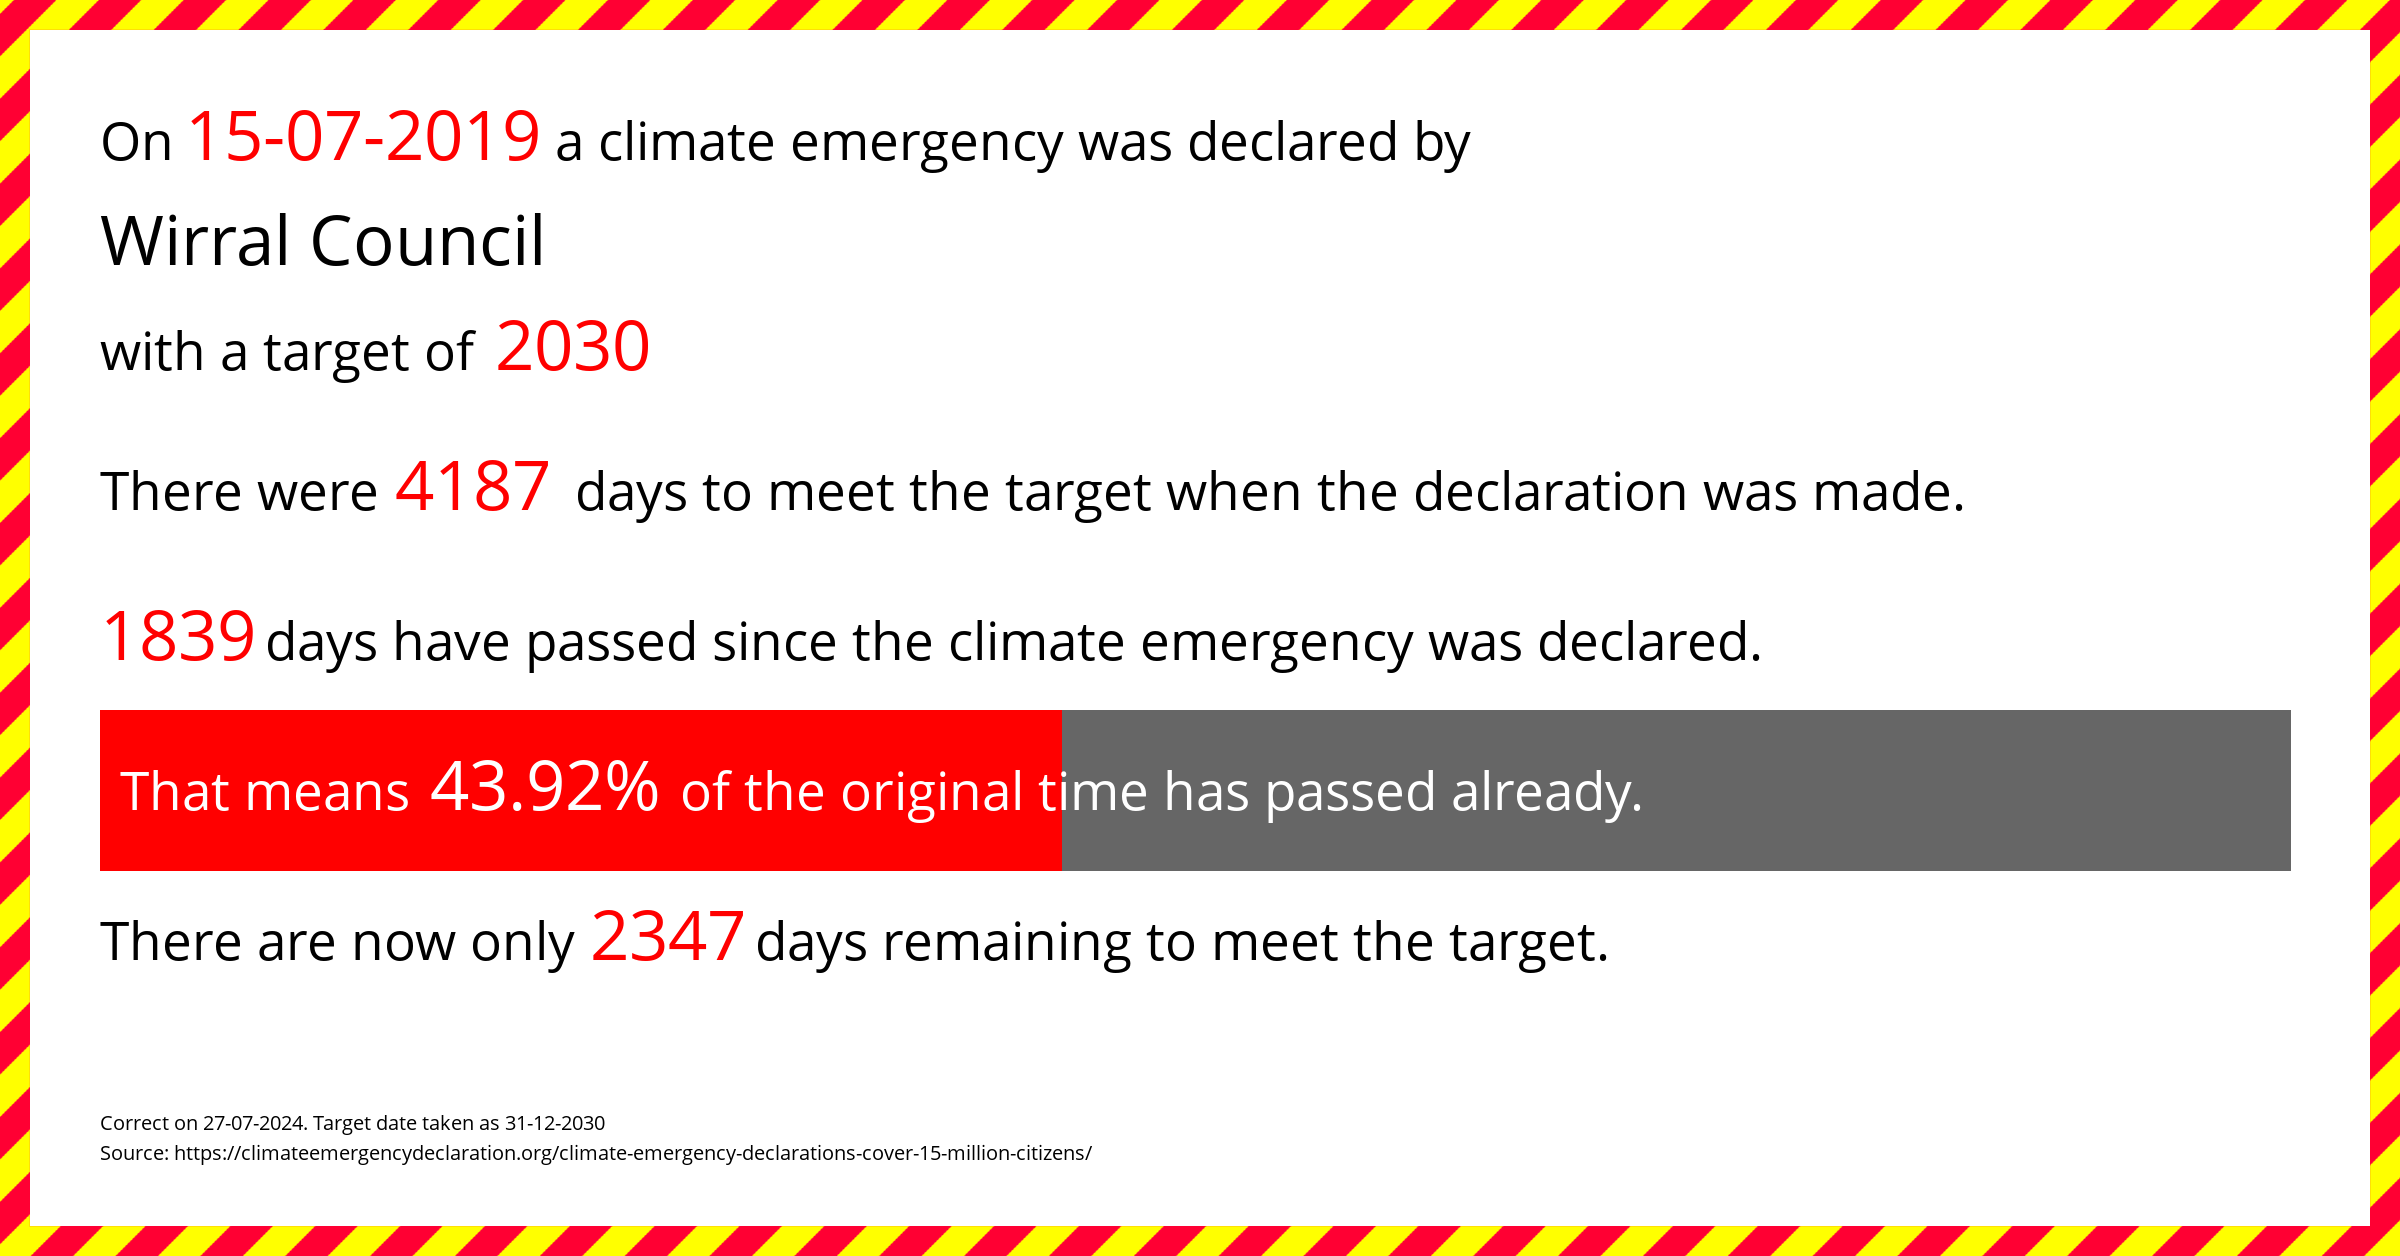 Wirral Council declared a Climate emergency on Monday 15th July 2019, with a target of 2030.